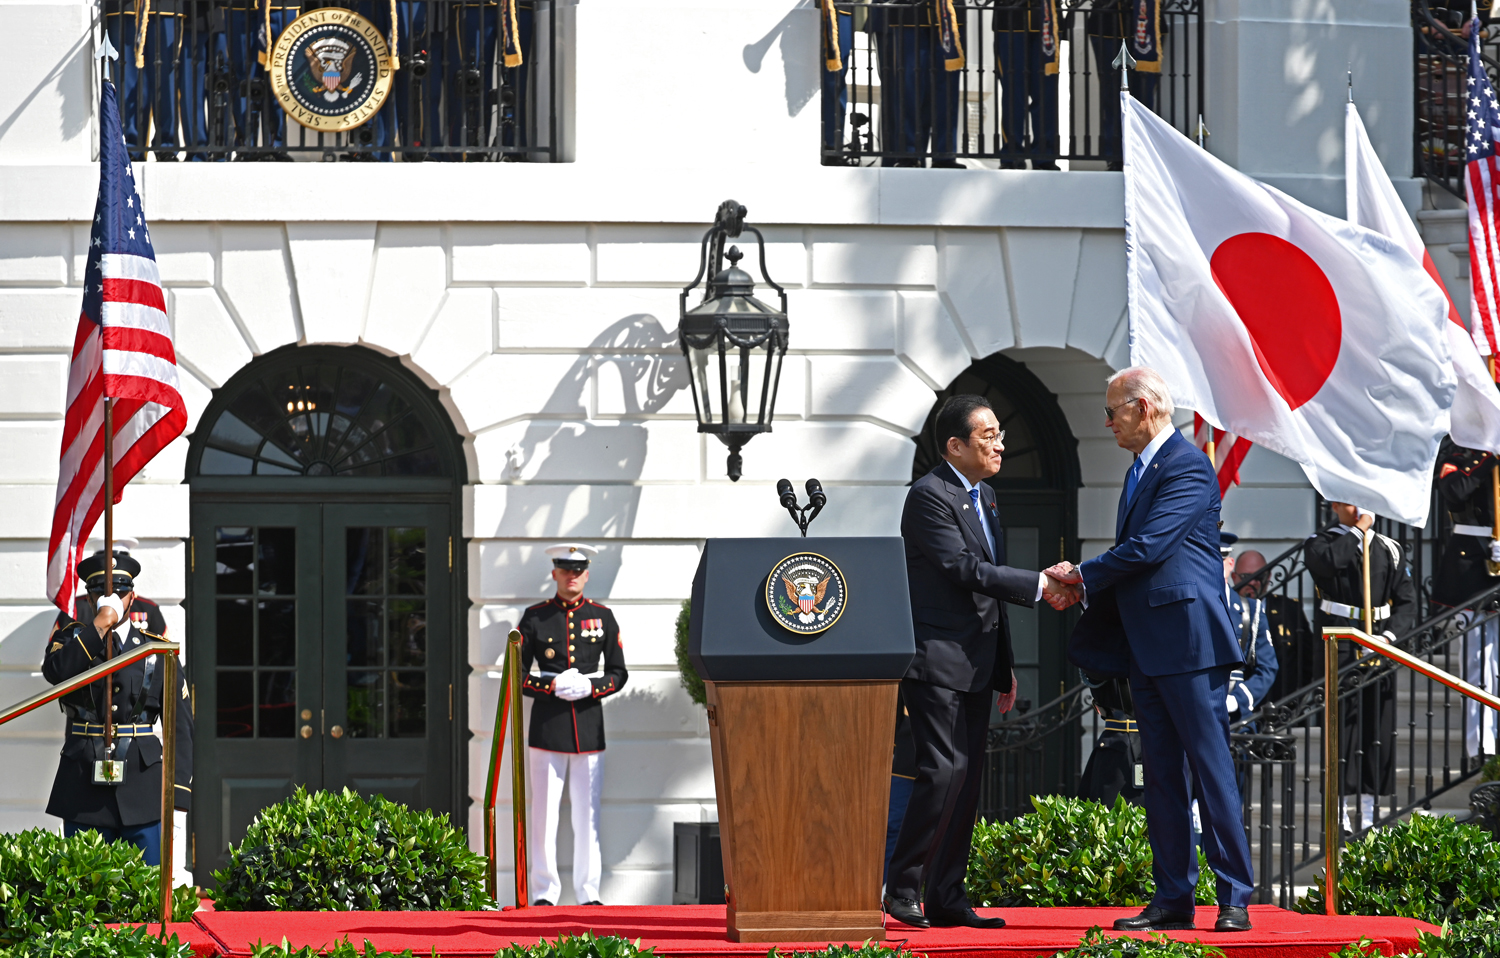 President Joe Biden and Japanese Prime Minister Fumio Kishida shake hands in front of the White House and are flanked by the U.S. and Japanese flags.